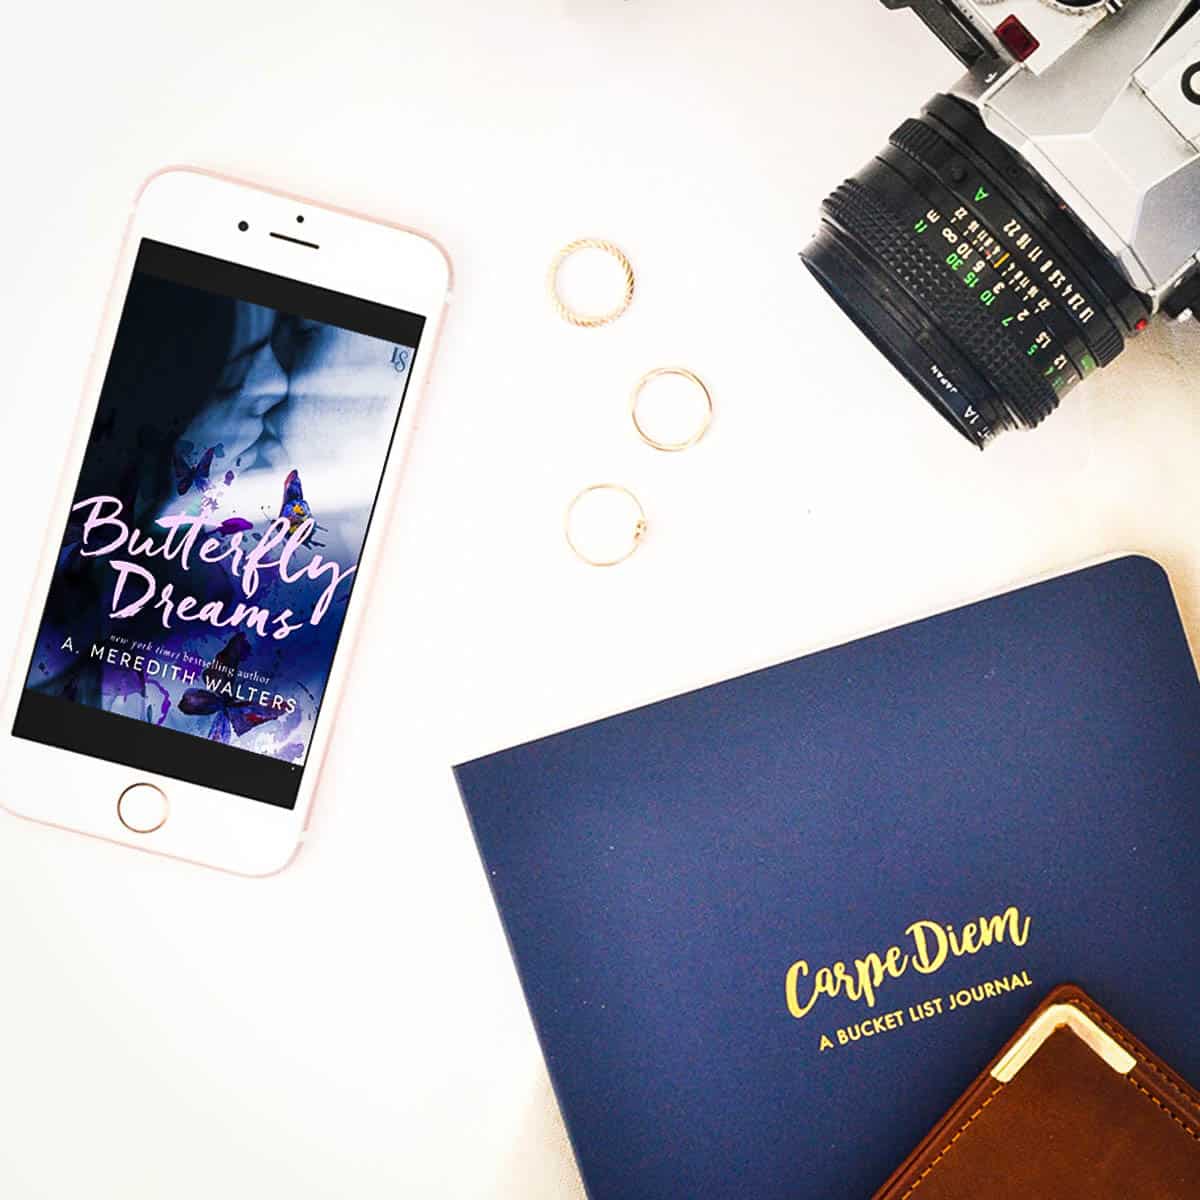 Enjoy an excerpt from Butterfly Dreams by A. Meredith Walters, an emotional romance about a woman waiting to die and a guy learning to live again.